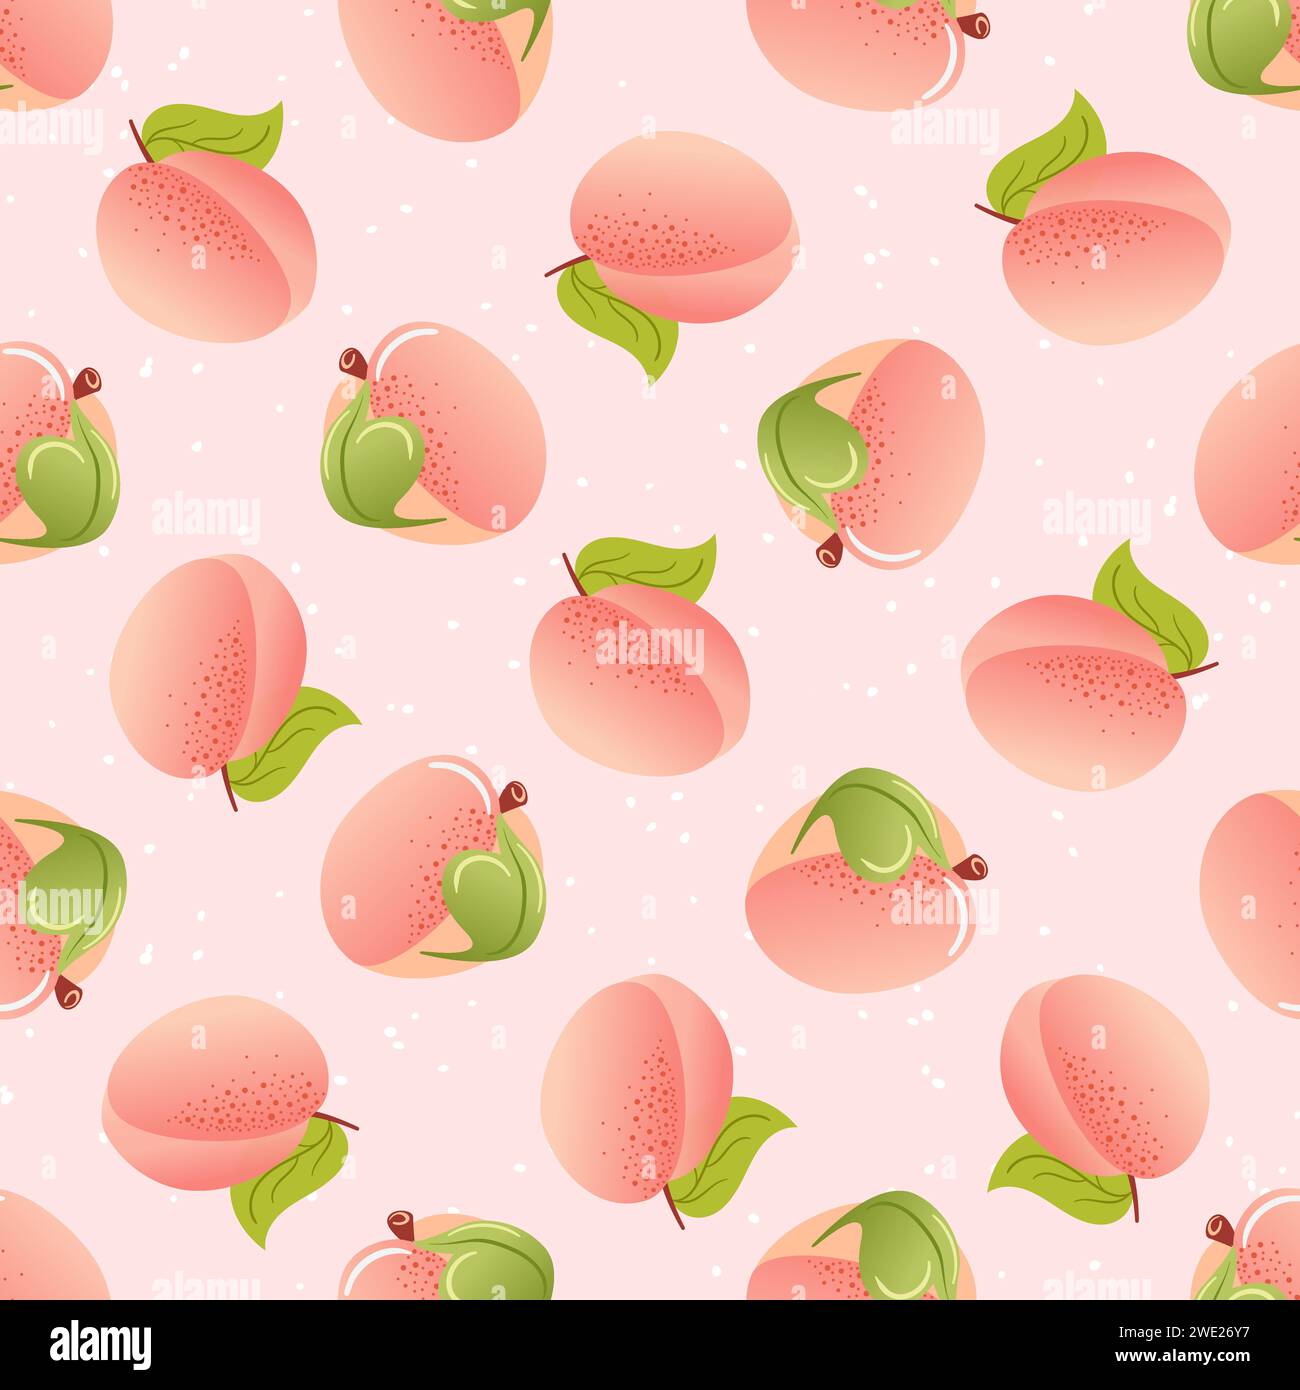 Peach Fuzz. summer seamless pattern in minimalistic style. Tropical exotic fruits, leaves. Healthy food. For menu, cafe, wallpaper, fabric background Stock Vector